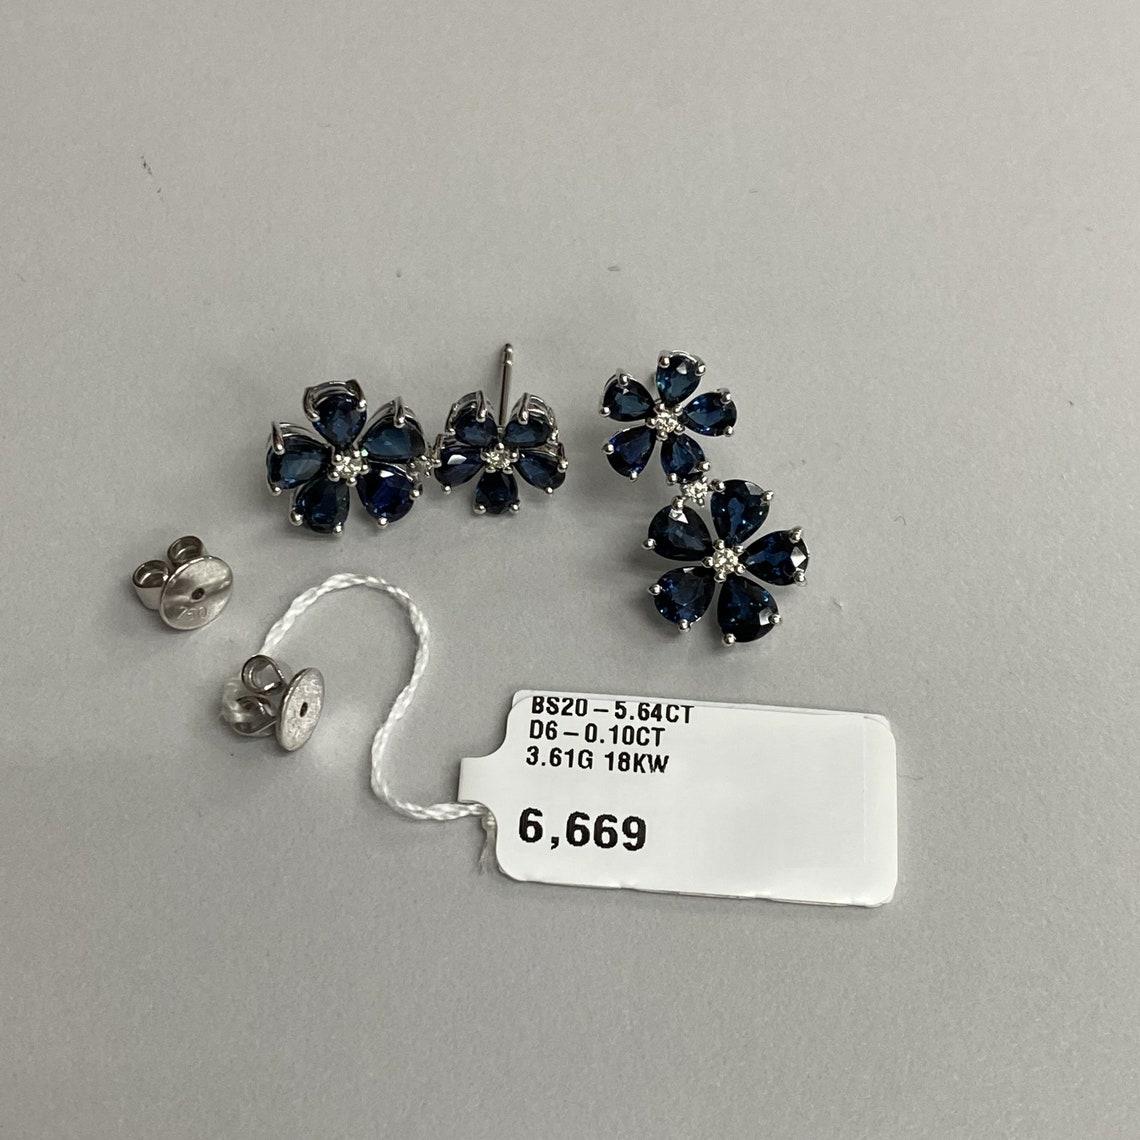 A Rare Important Pair of 18KT White Gold Large Blue Sapphire and Diamond Floral Flower Dangle Earrings. Earrings are comprised of approx 6 Carats of Finely Set Glittering Sapphires and Diamonds forming Flowers. The Sapphires and Diamonds are of